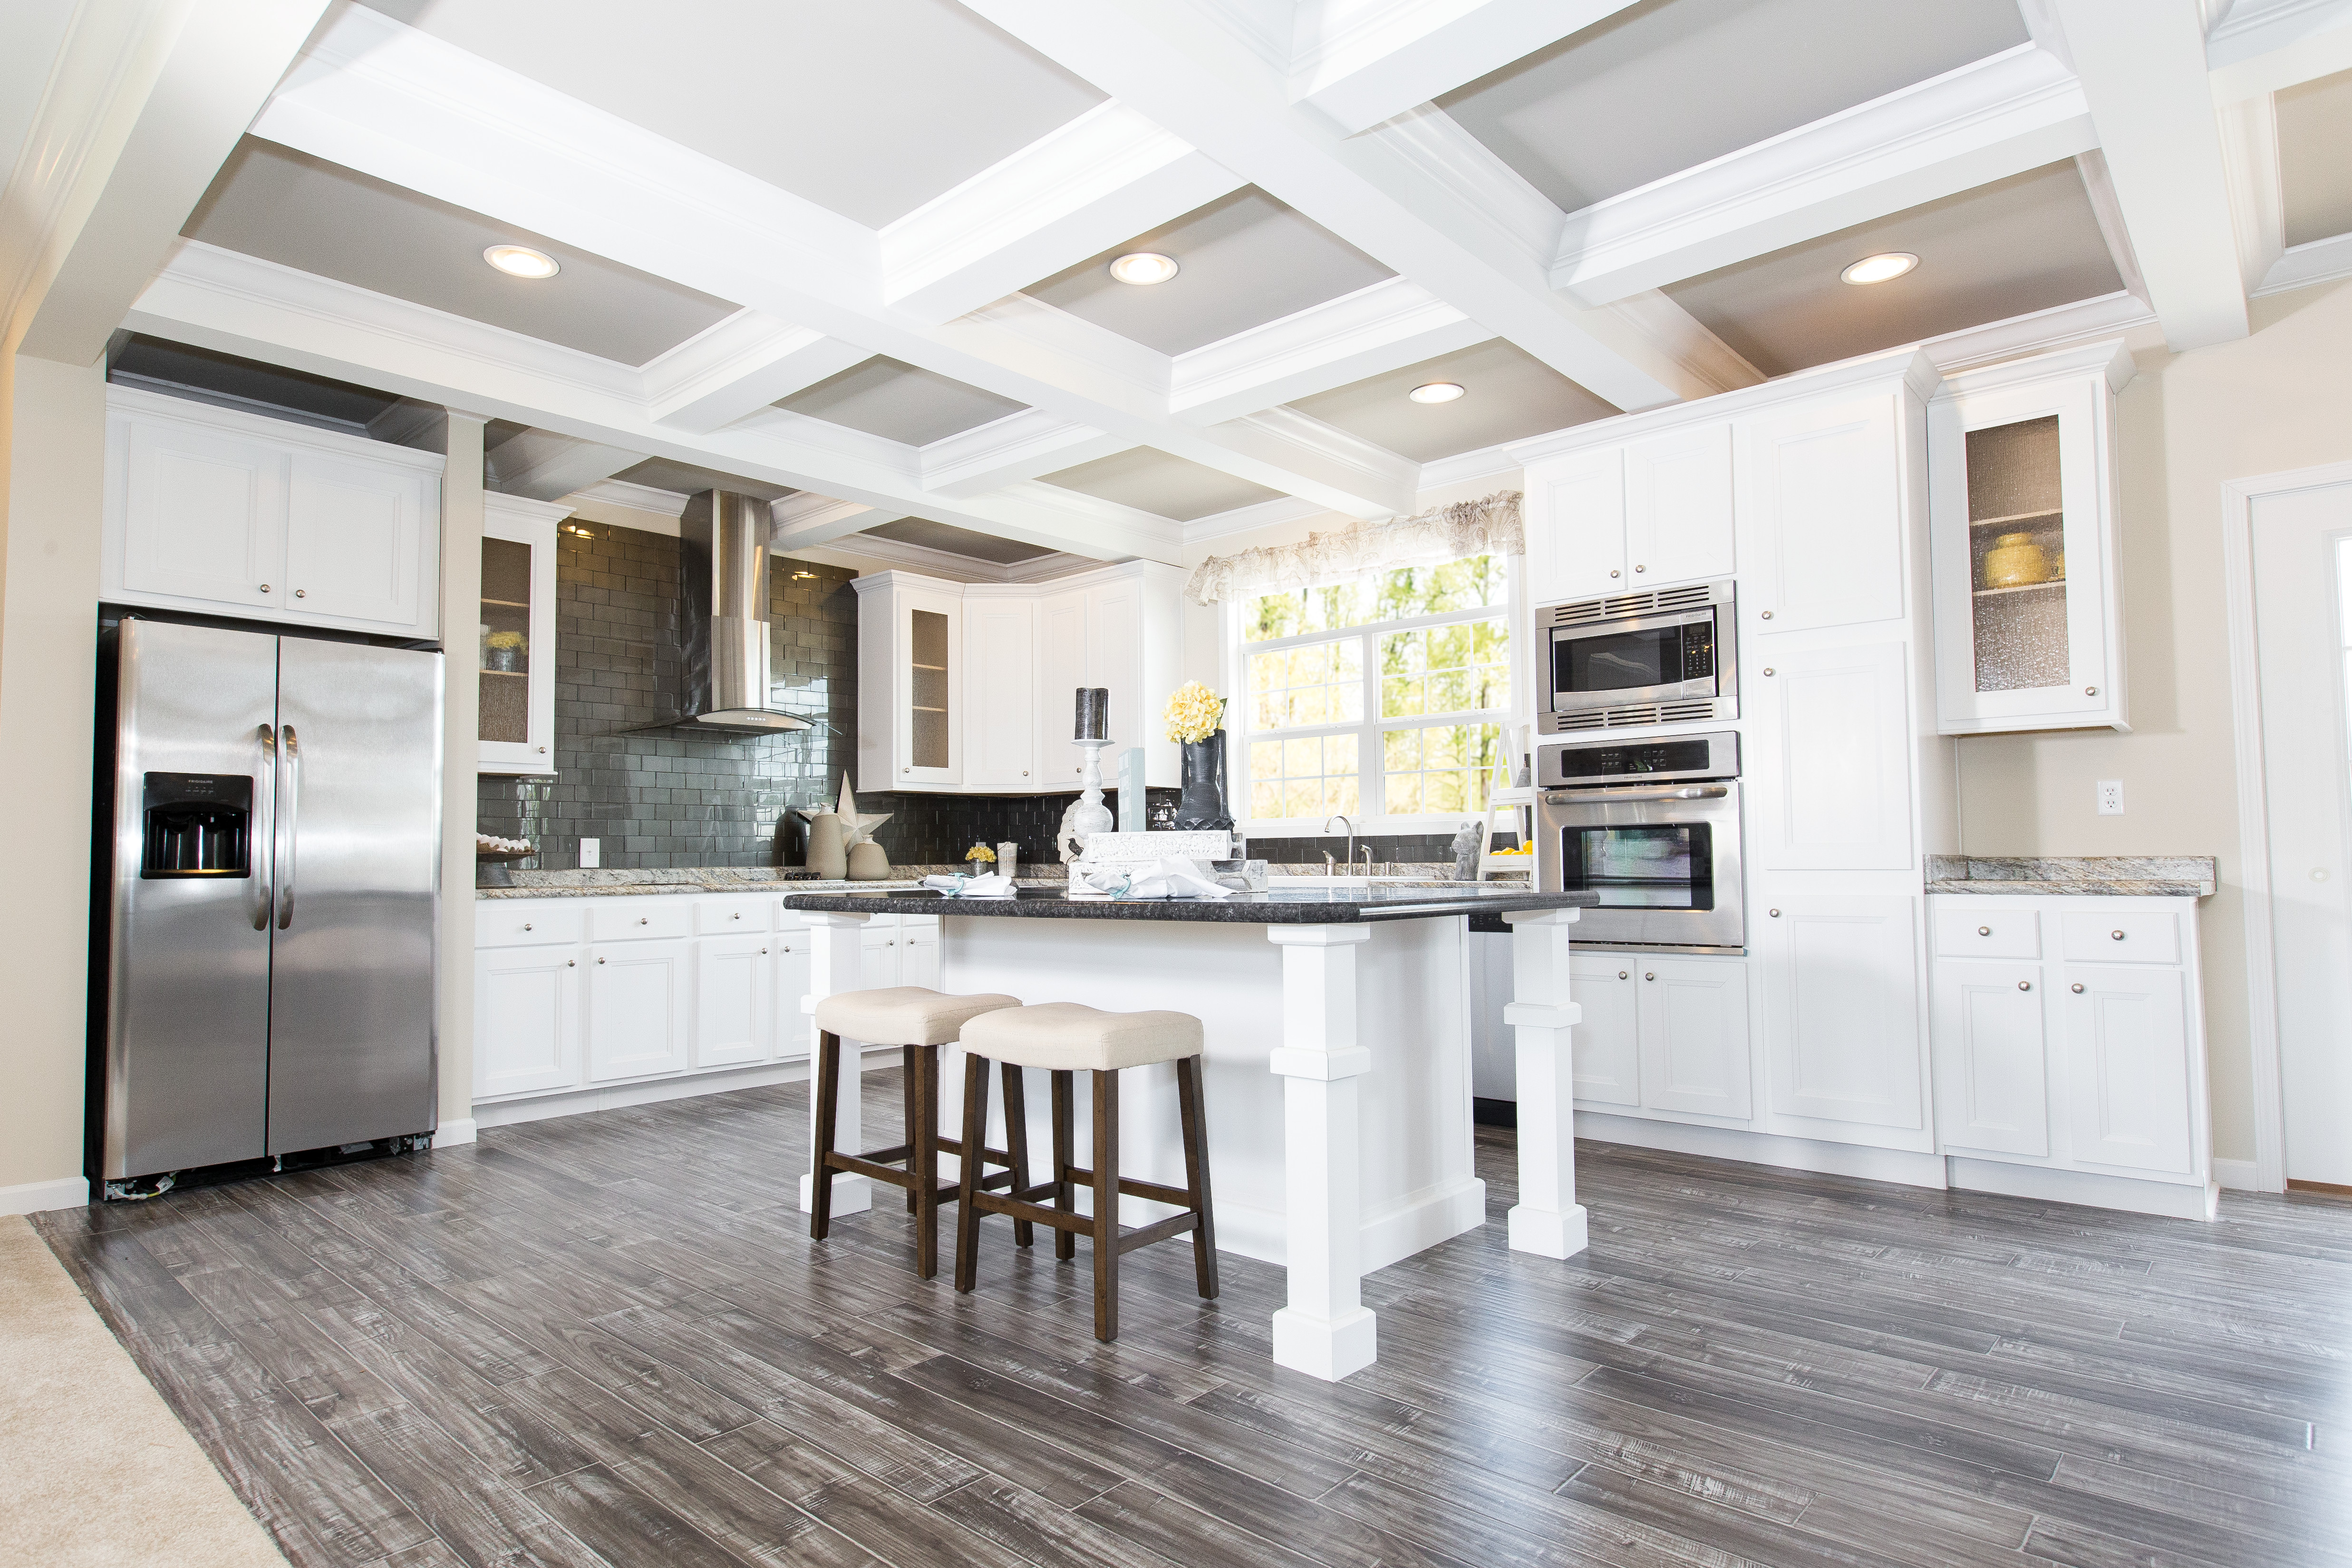 Light and bright manufactured home kitchen with coffered ceilings, island, and stainless steel features